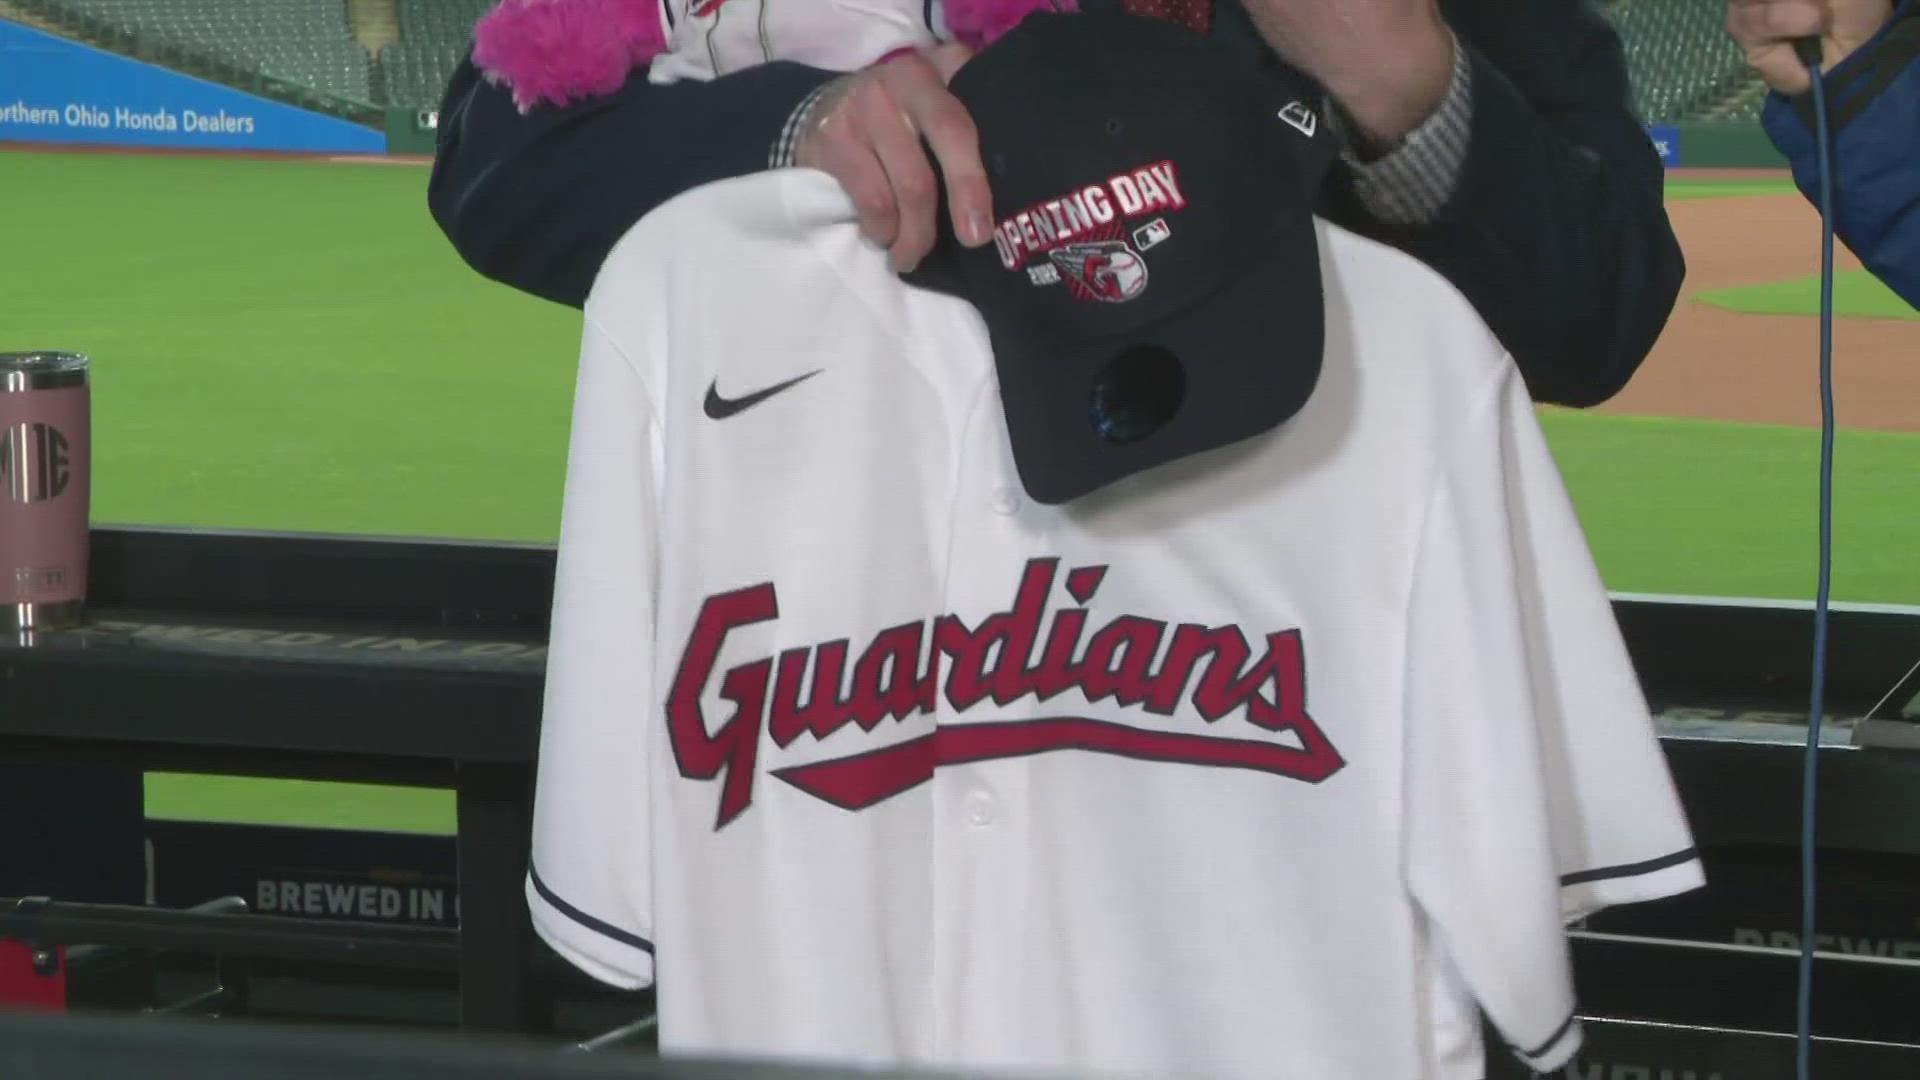 Cleveland Guardians: Renamed MLB team sells new merchandise to fans